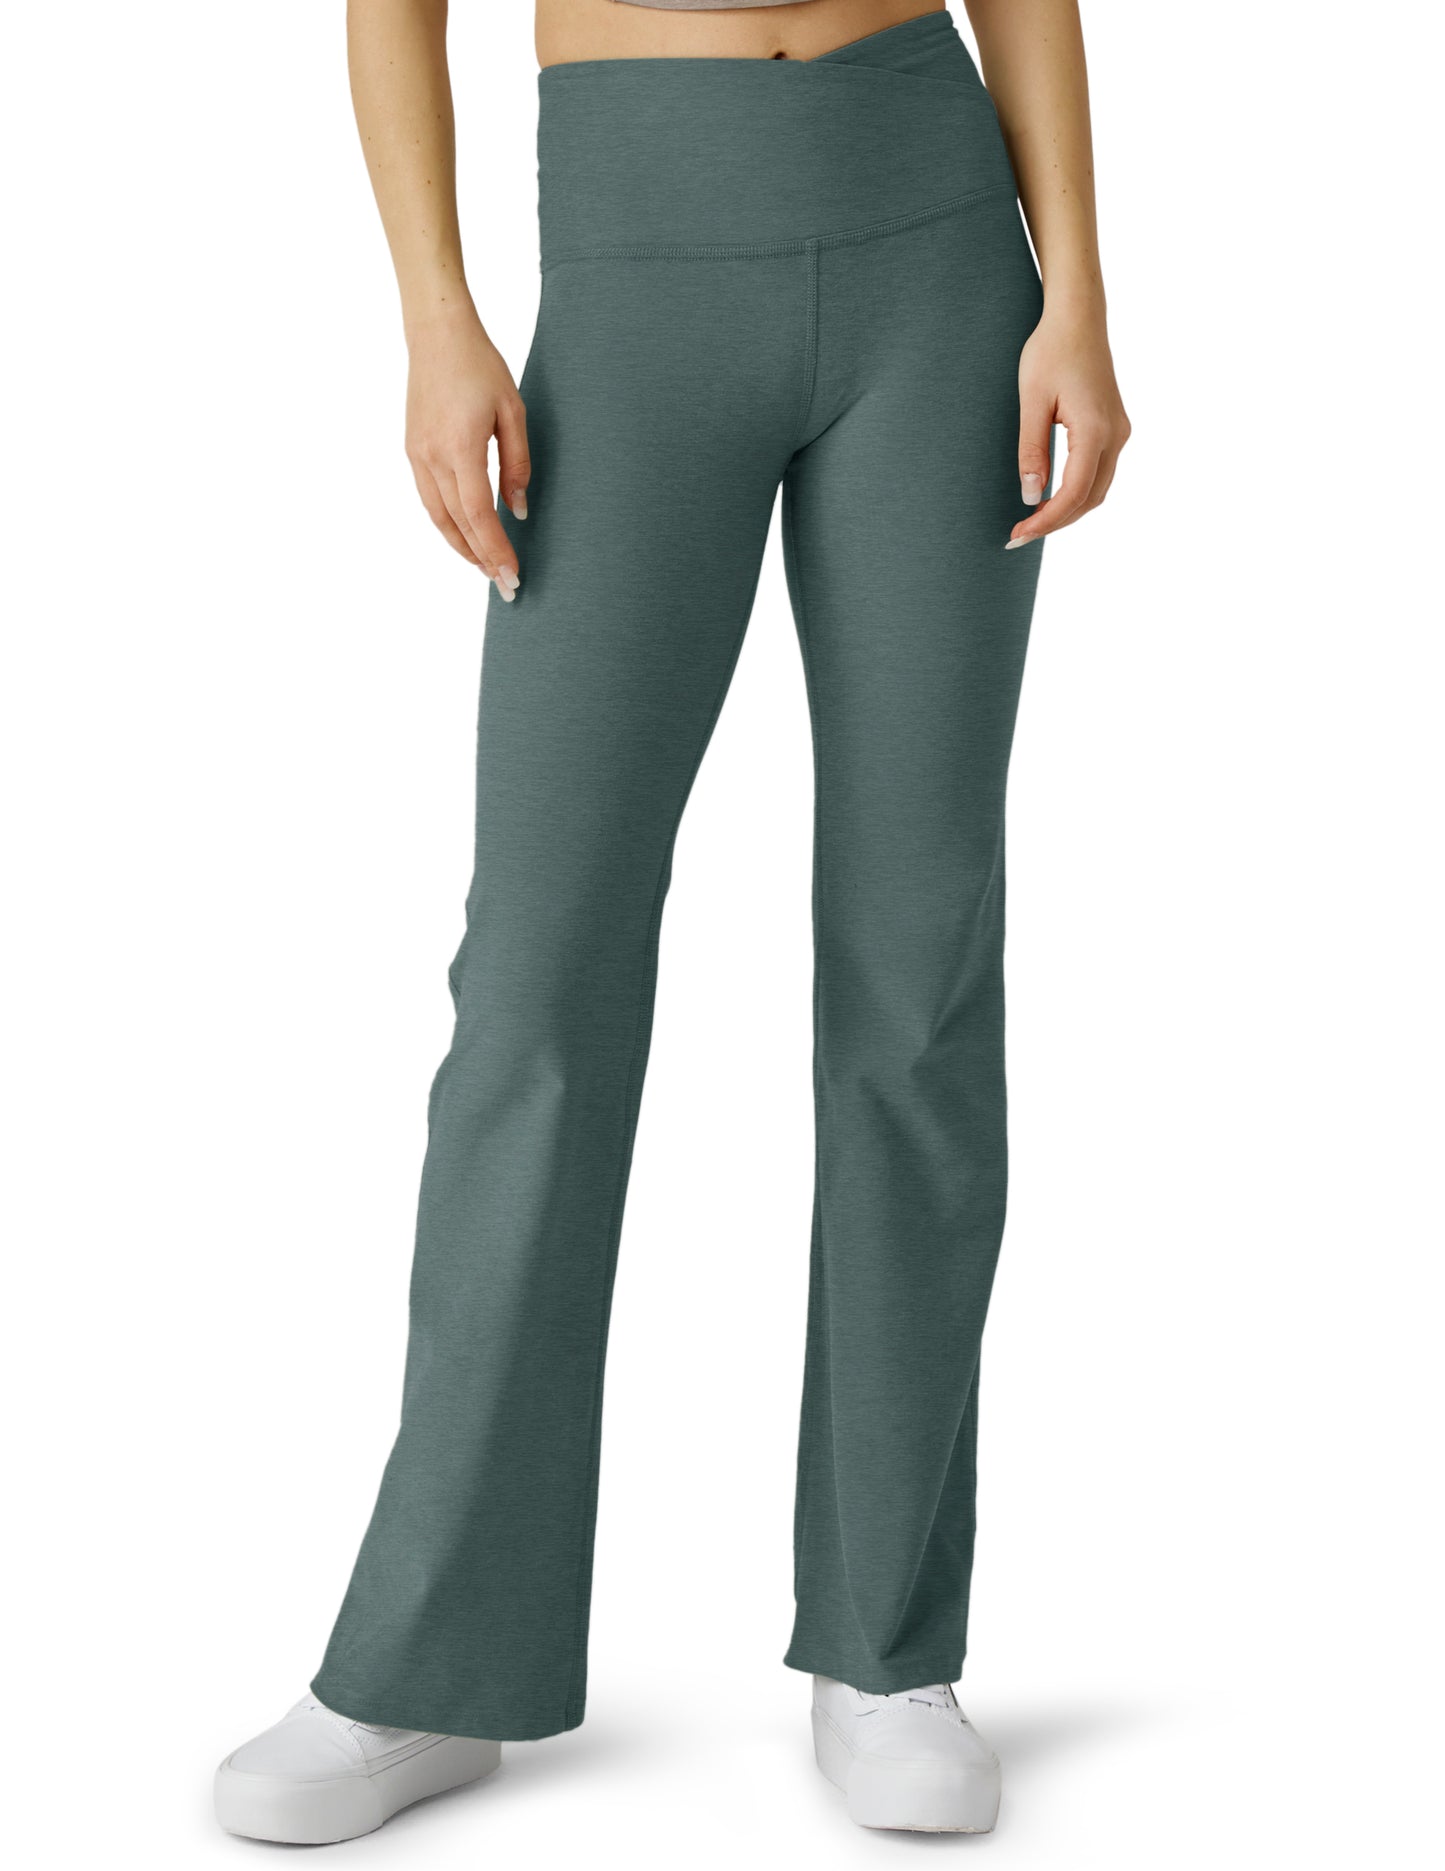 BEYOND YOGA SPACEDYE AT YOUR LEISURE HIGH WAISTED BOOTCUT PANT STORM HEATHER